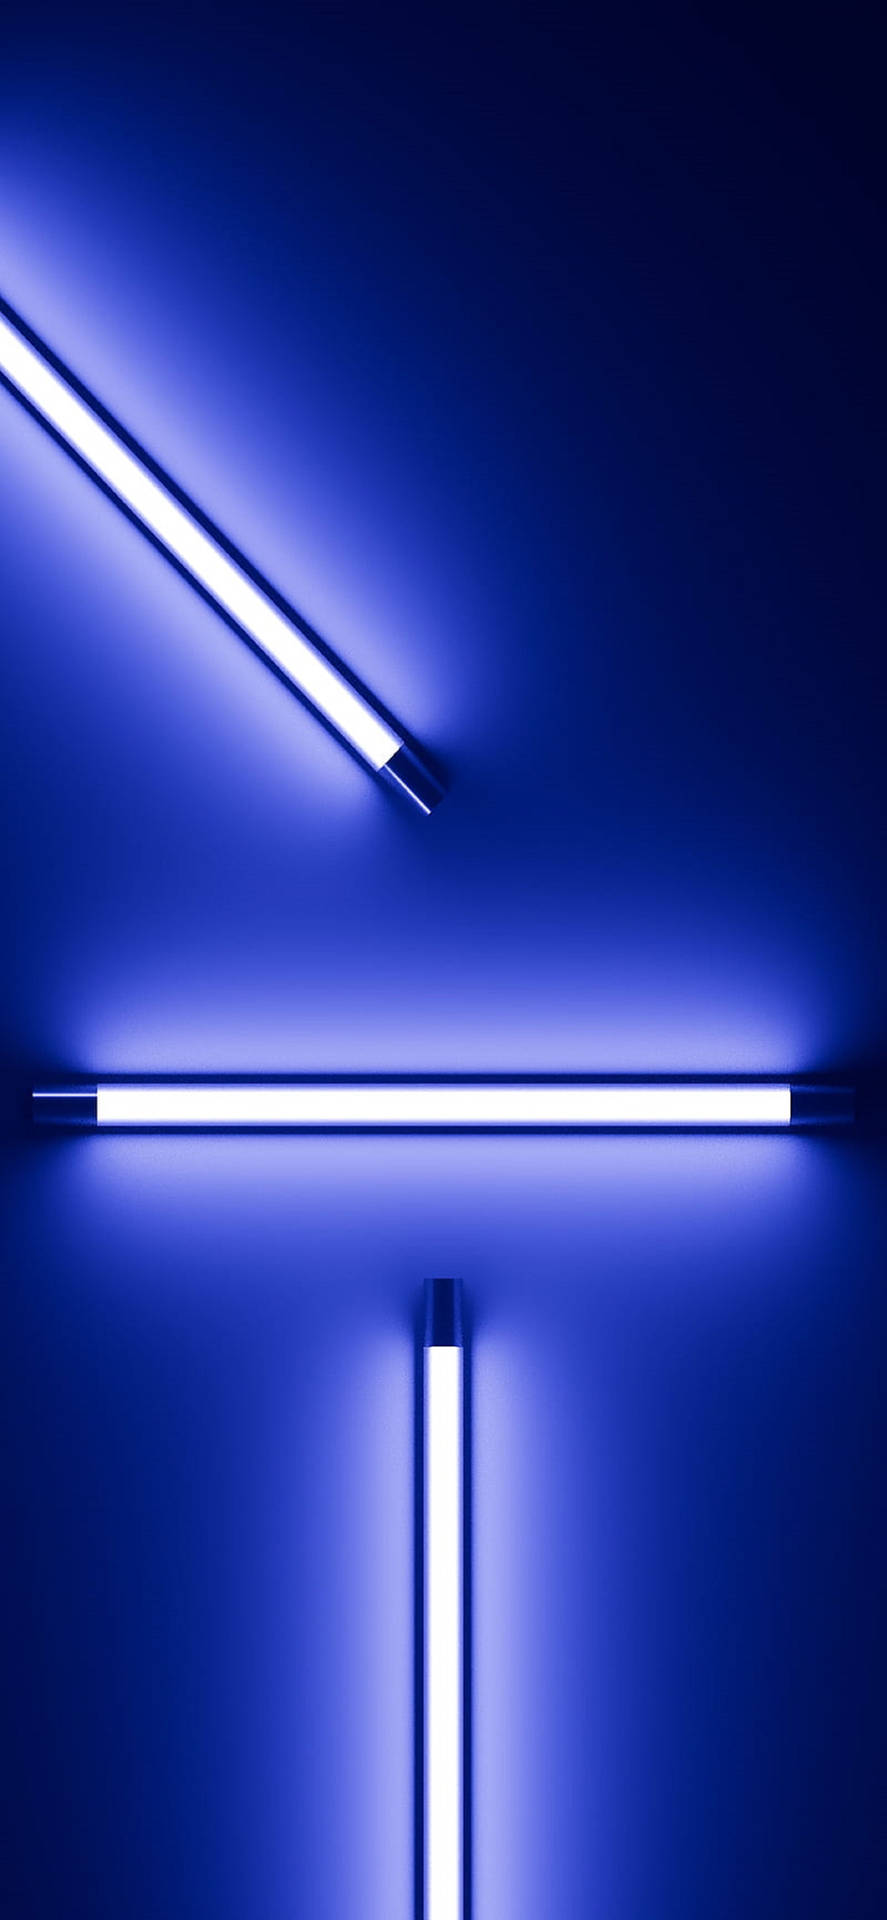 4k Neon Iphone Blue Lights In Wall